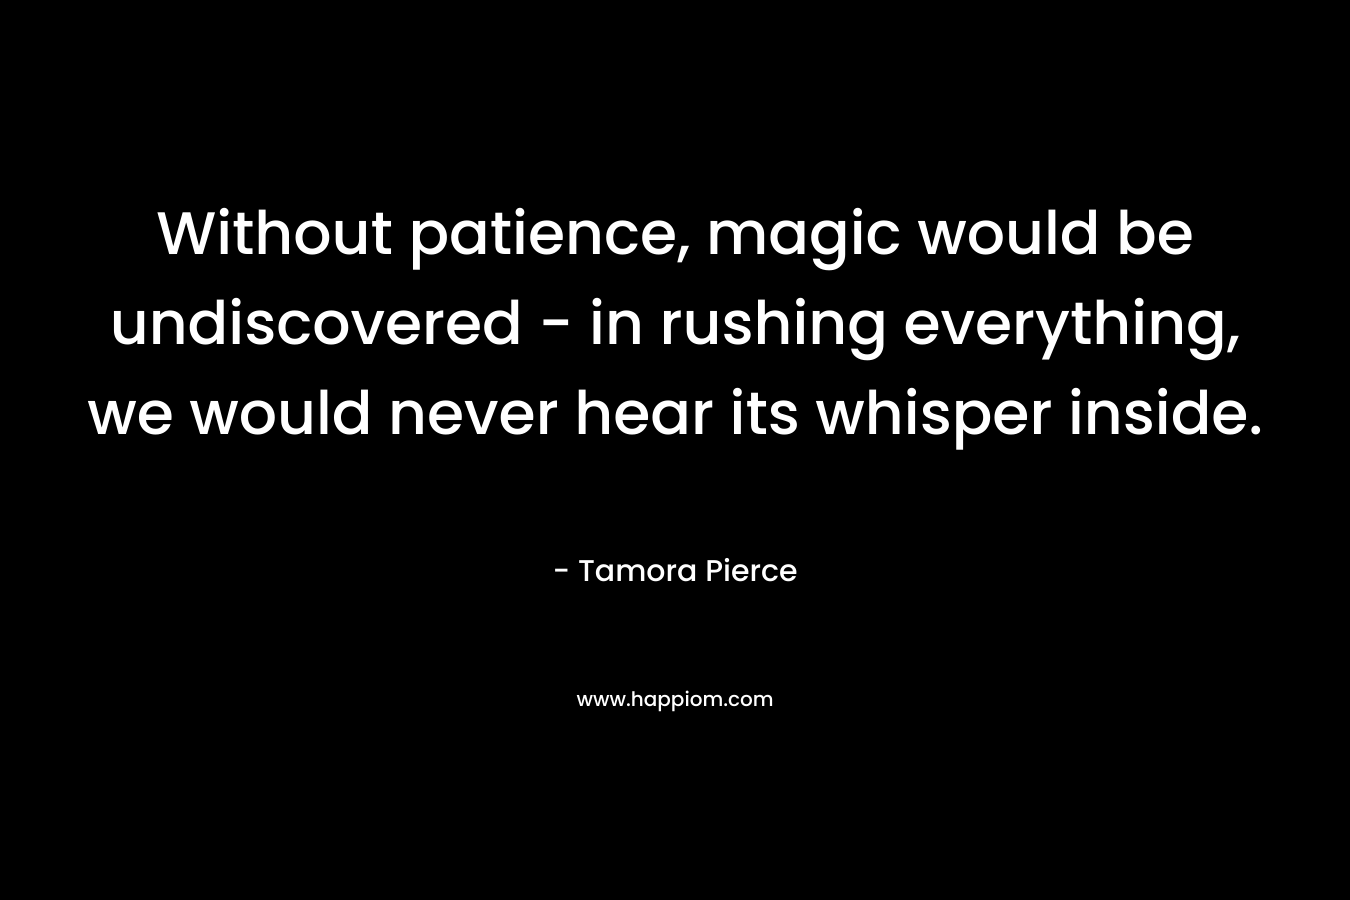 Without patience, magic would be undiscovered – in rushing everything, we would never hear its whisper inside. – Tamora Pierce